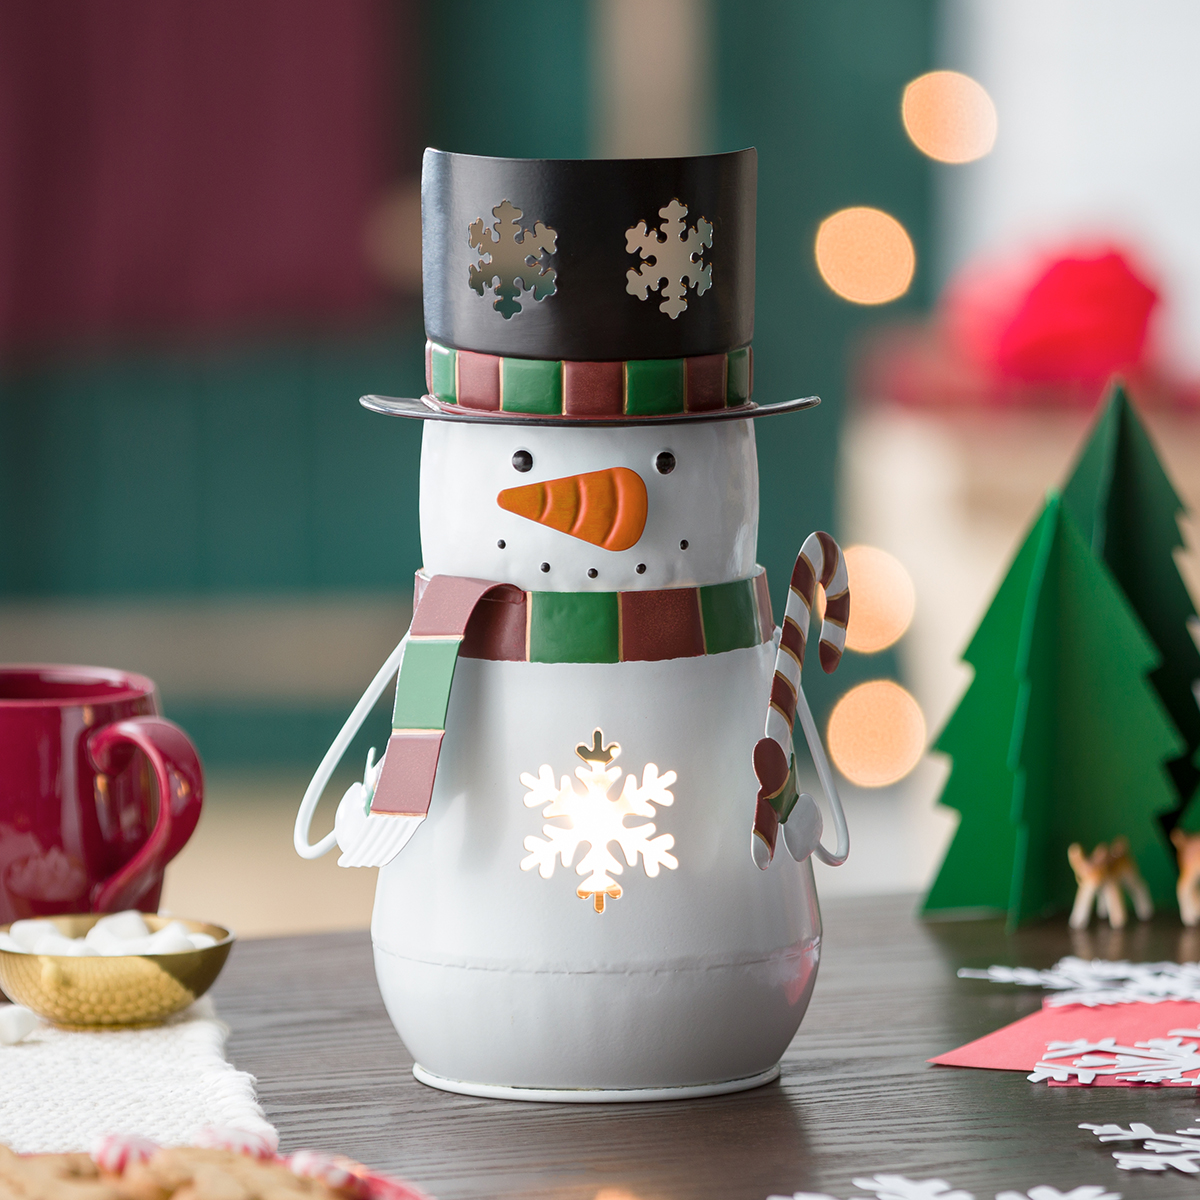 Snowday Scentsy Warmer Snowman The Safest Candles